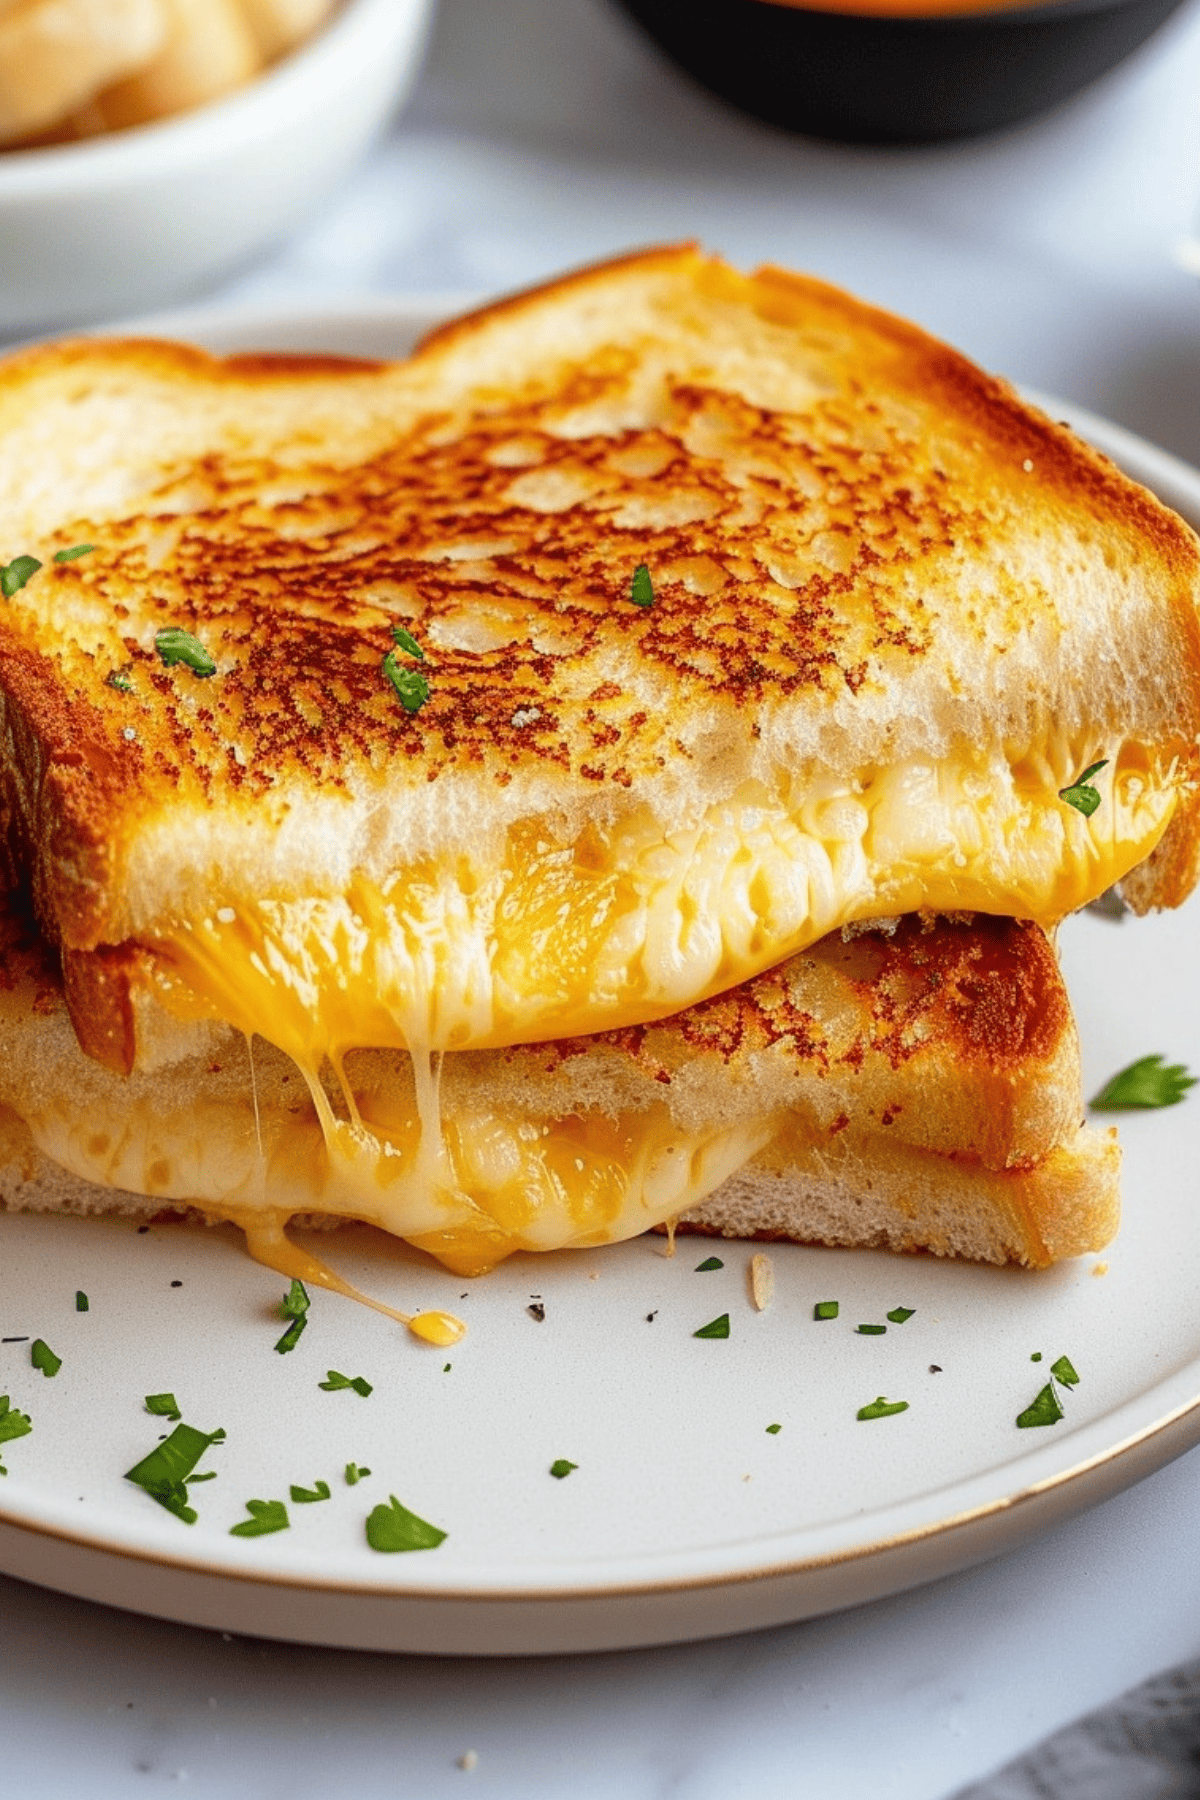 Sliced grilled cheese sandwich on a plate.